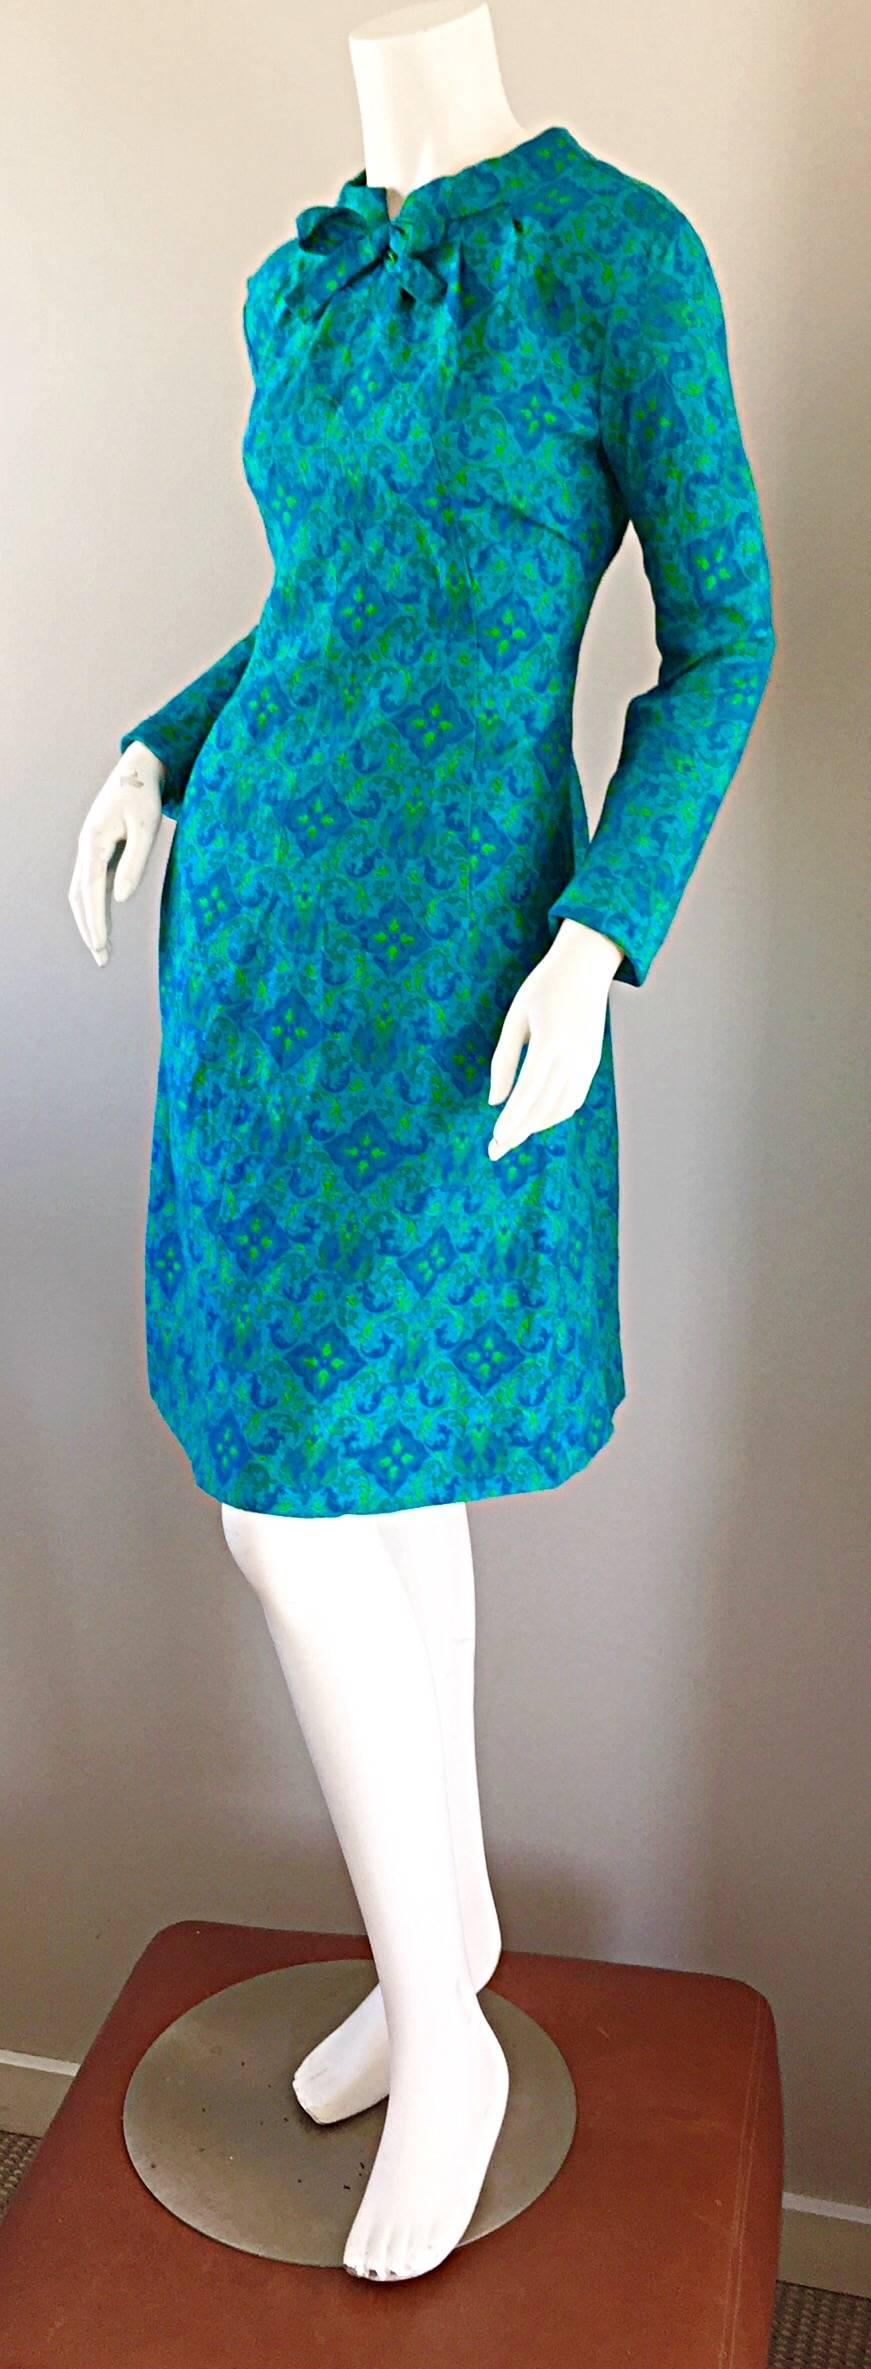 Charming vintage YEN YEN OF MALAYA 1960S teal blue and lime green paisley and brocade print silk A-Line dress! I have had the pleasure of owning a handful of dresses by this sought after 60s label, and this one is nothing less than perfect! Amazing